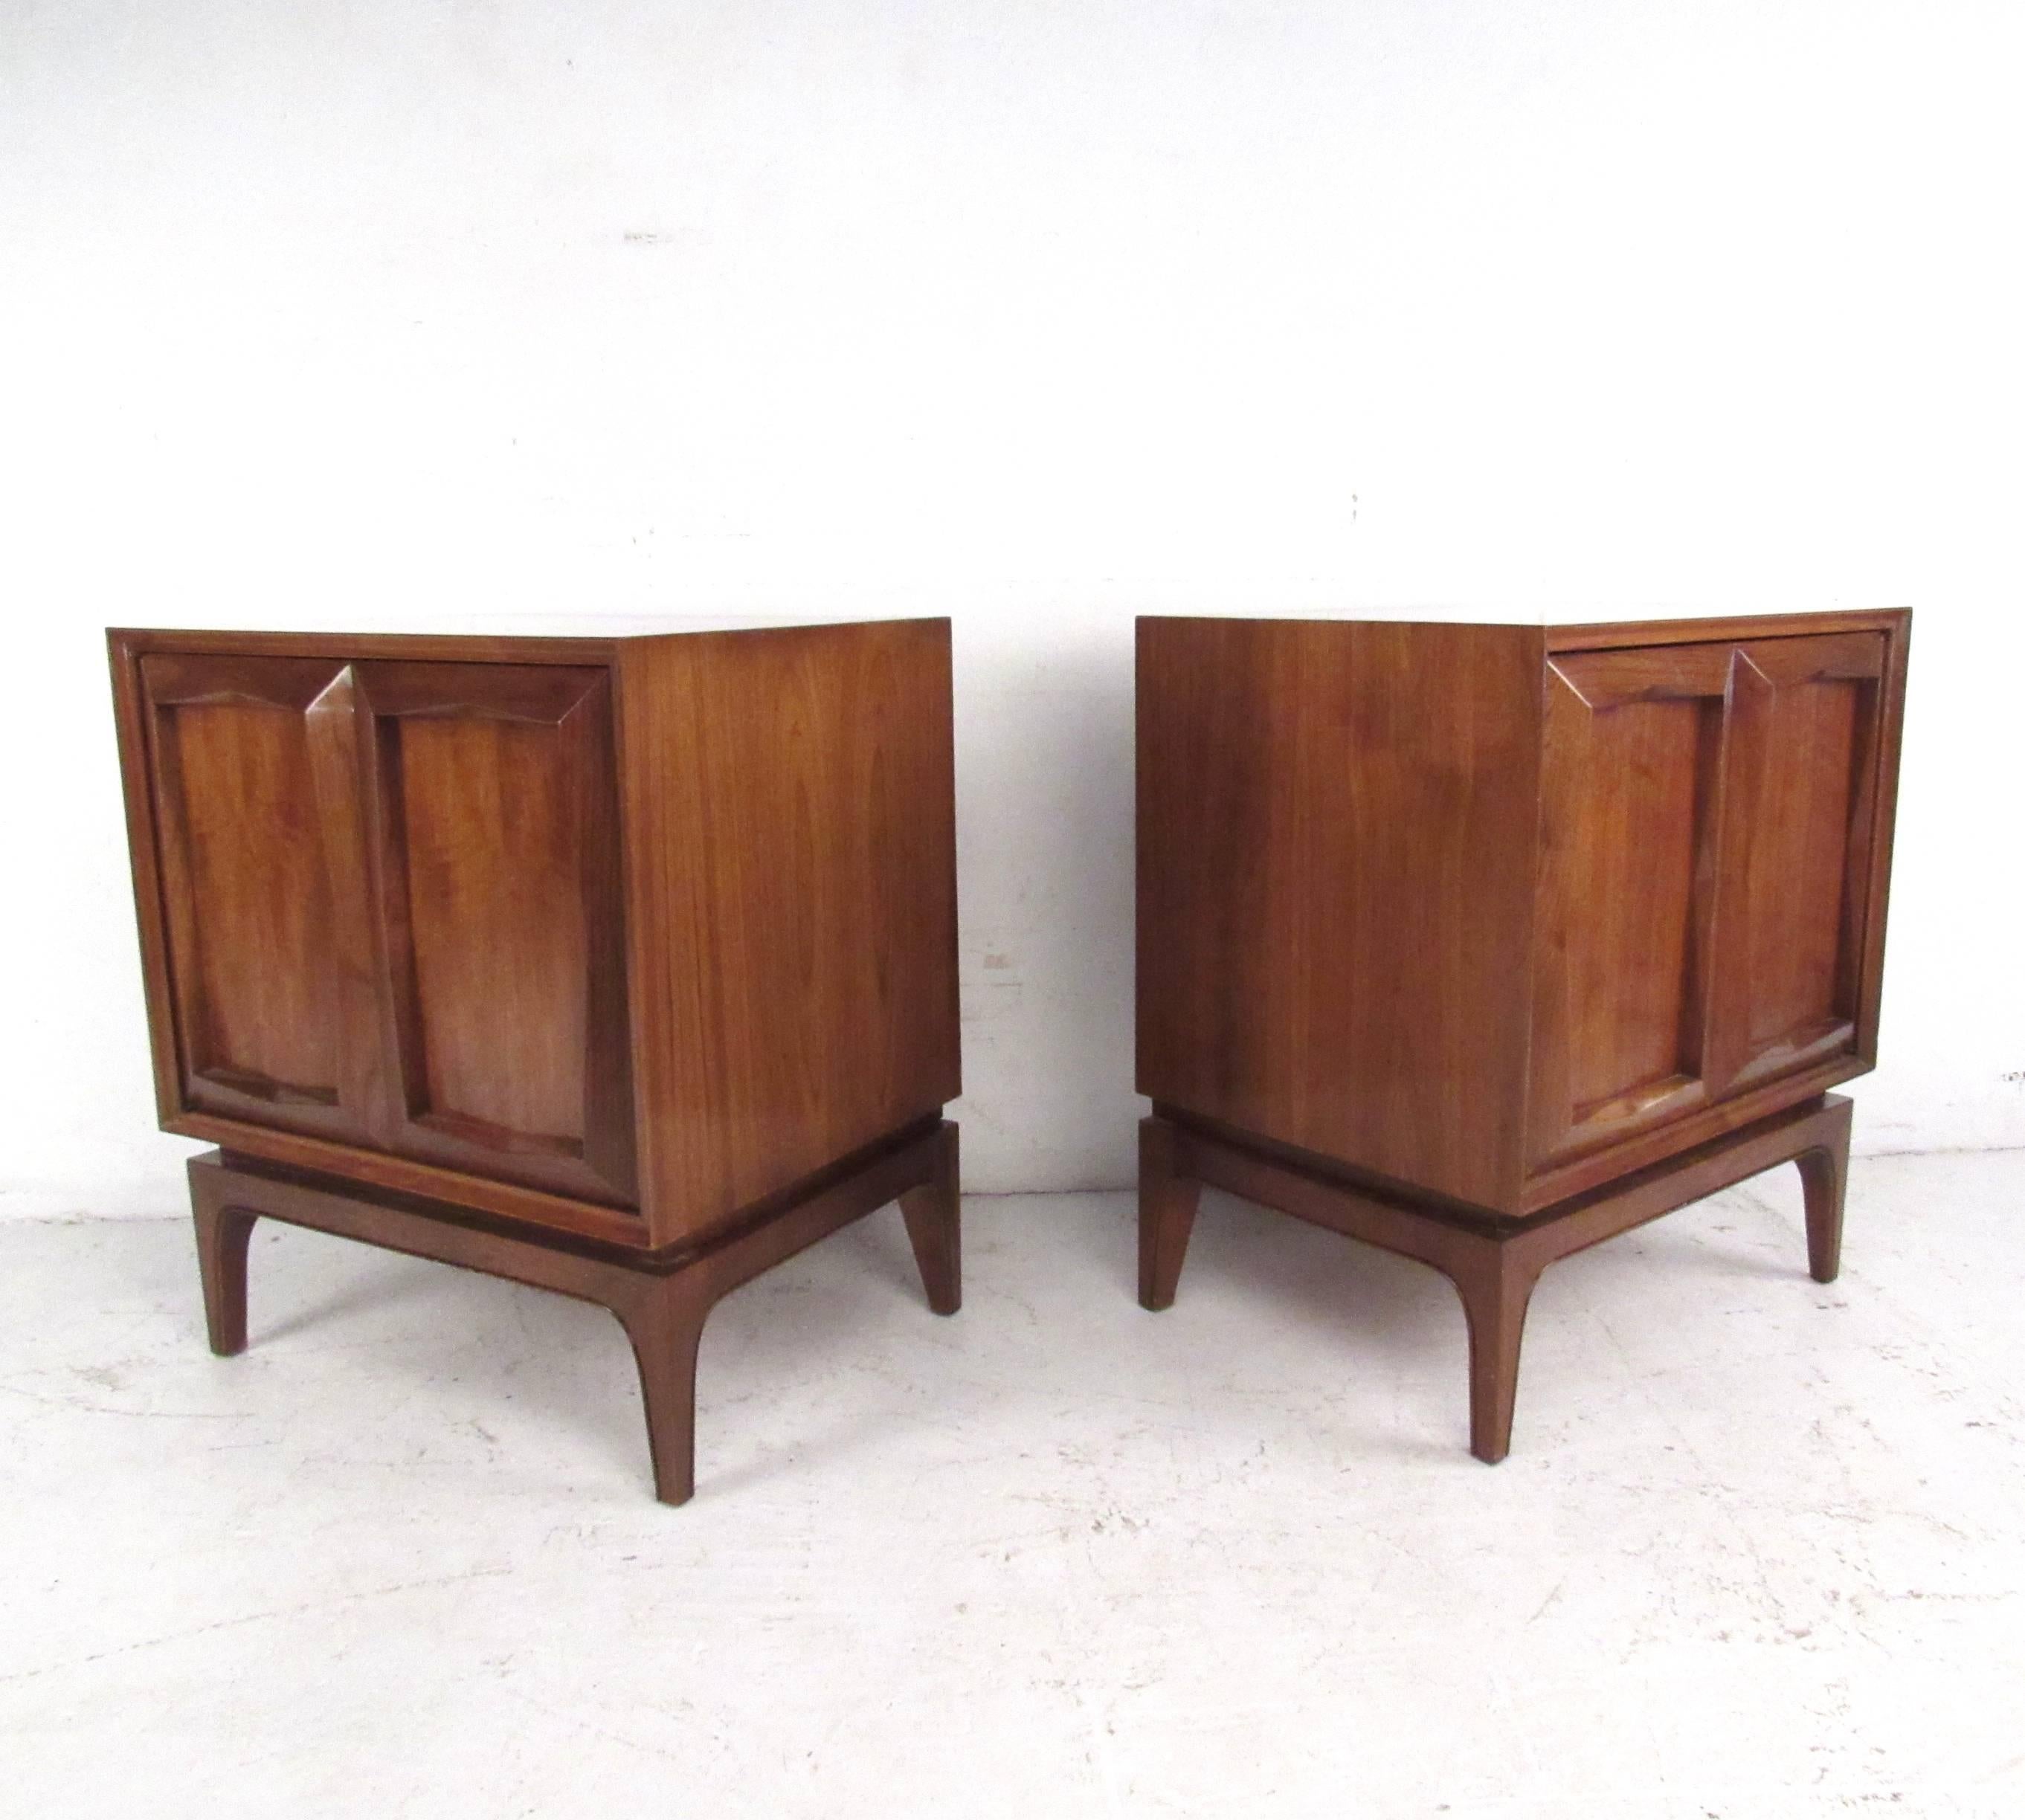 This vintage pair of nightstands feature spacious cabinet storage with shelves for added organization. Sculpted door fronts, tapered legs and a rich walnut finish make these an excellent addition to any Mid-Century interior. Please confirm item